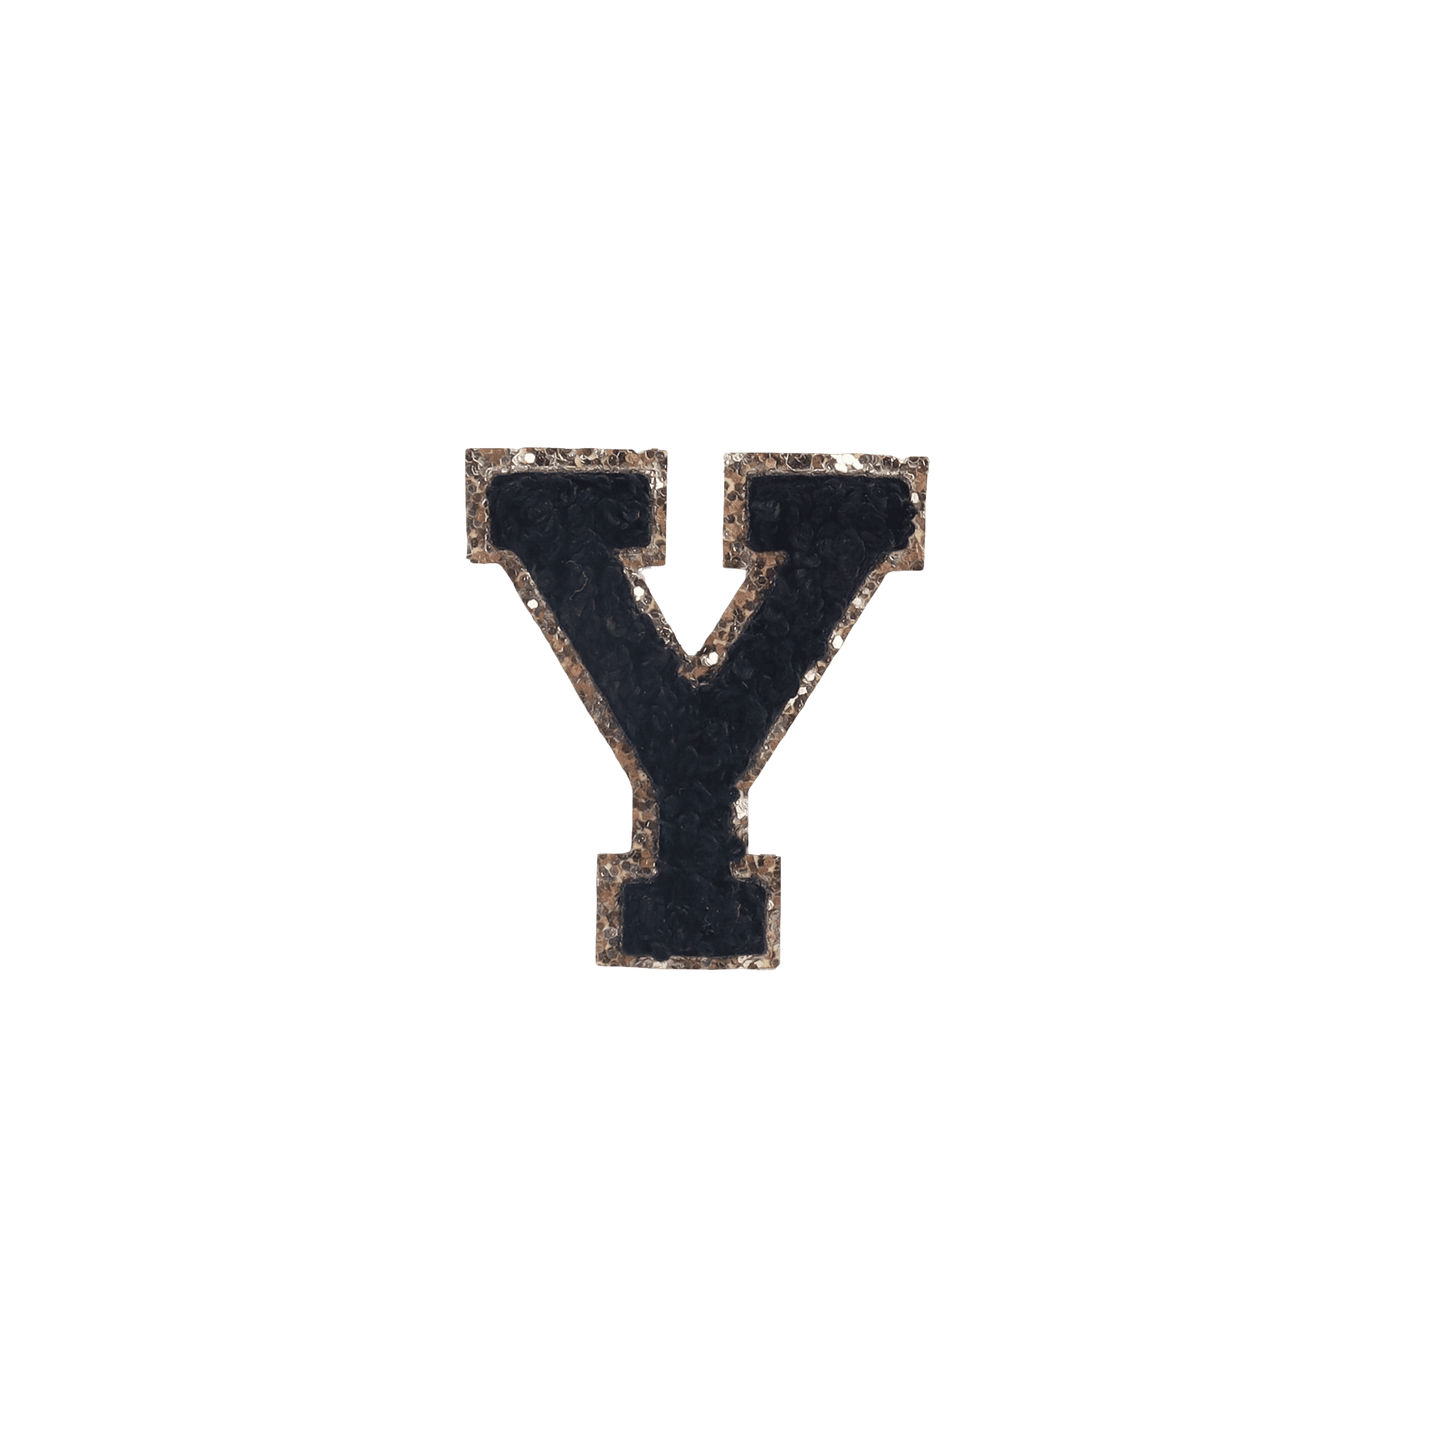 Y Letter Patches